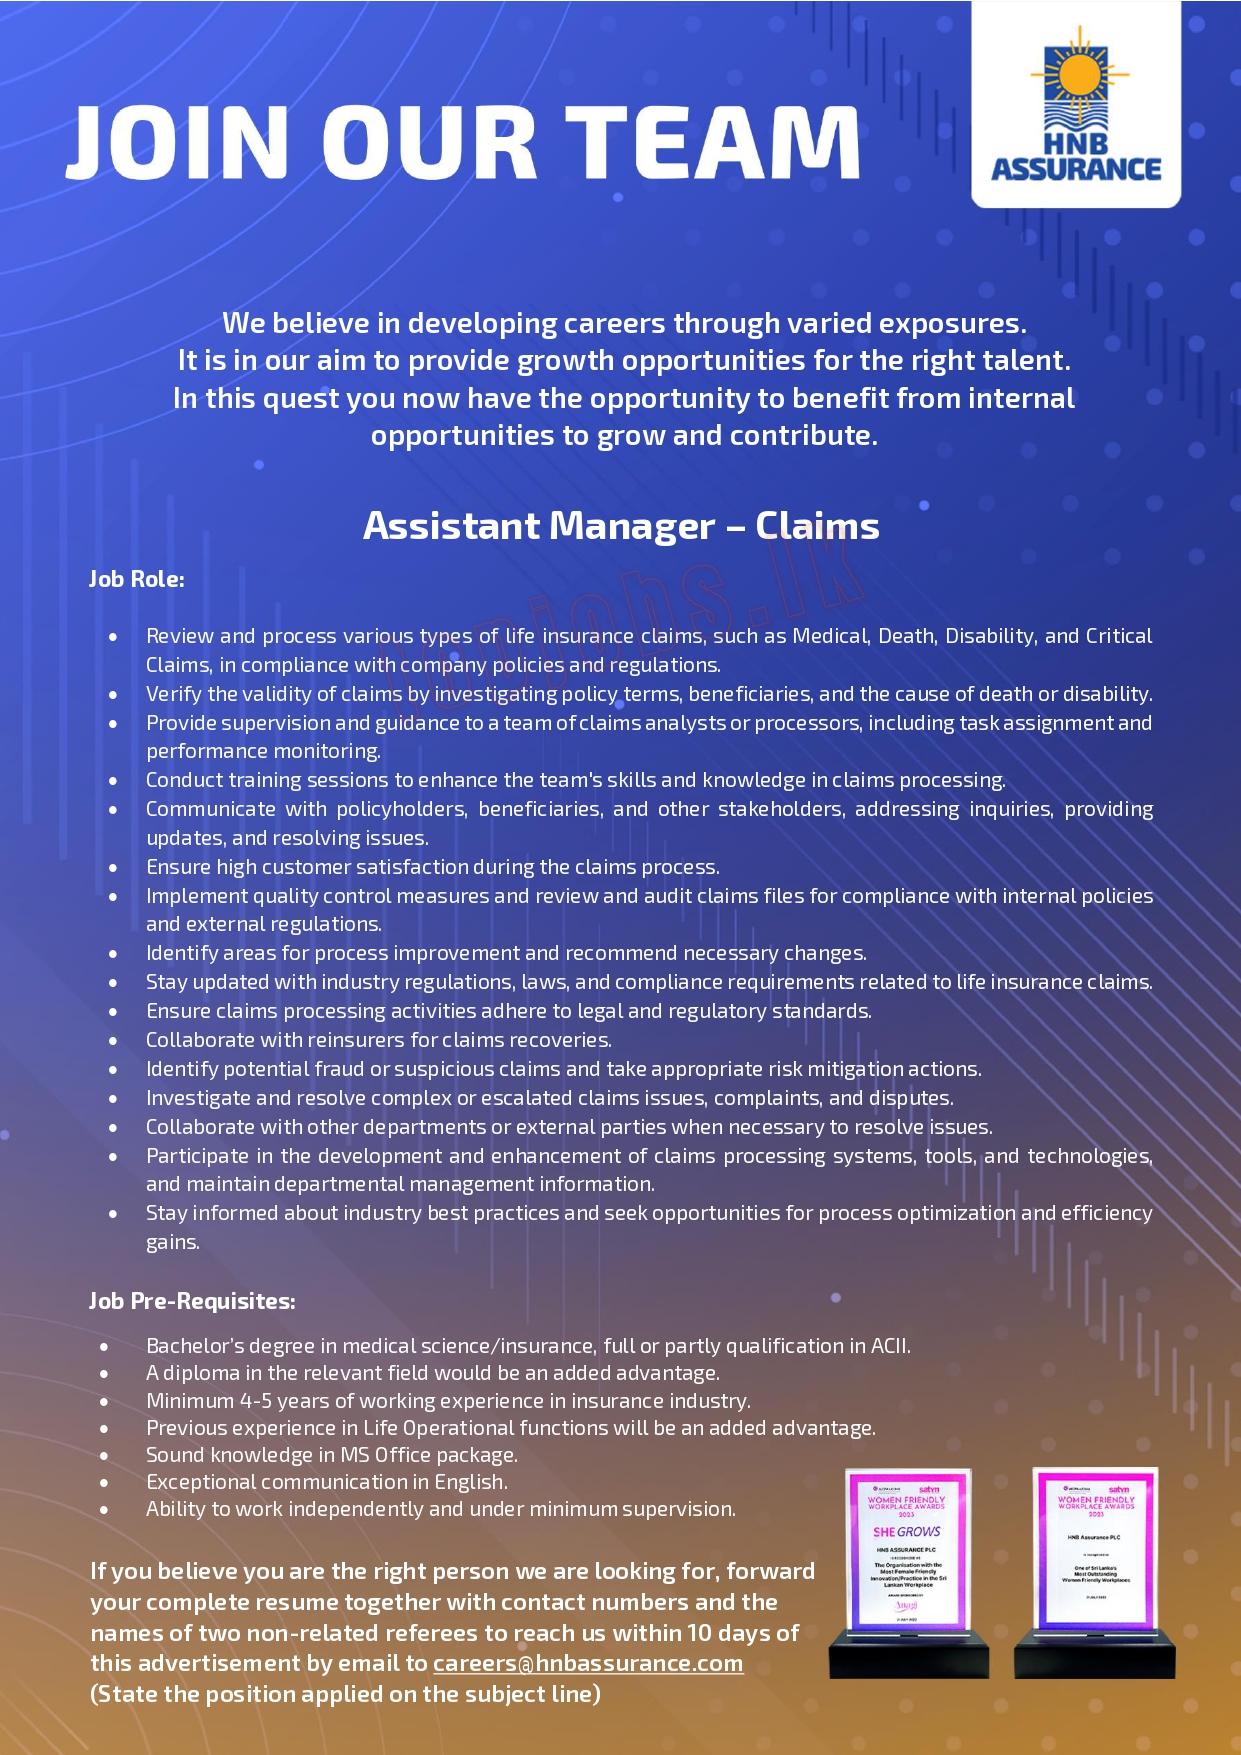 Assistant Manager - Claims